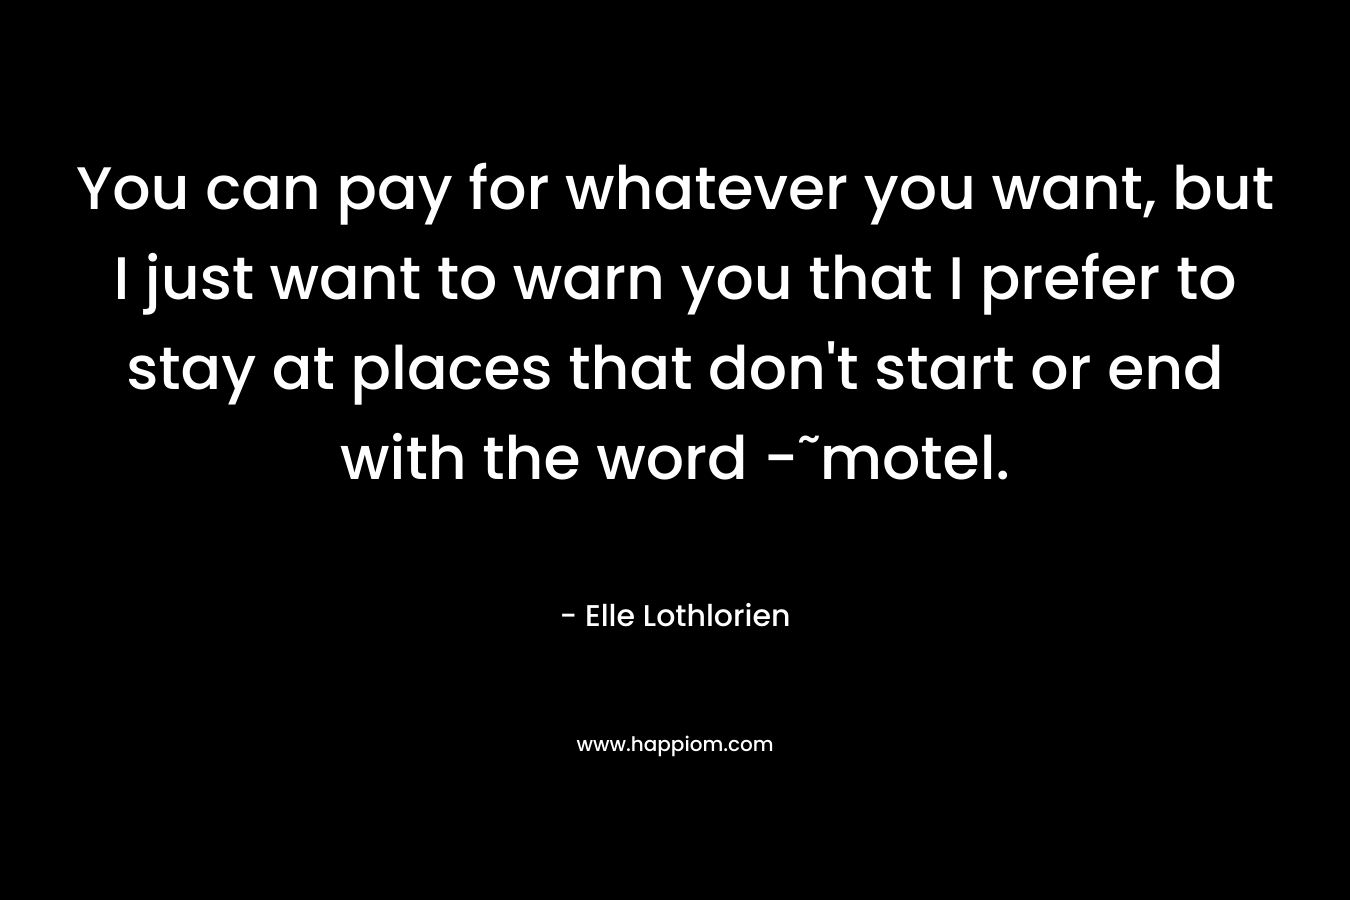 You can pay for whatever you want, but I just want to warn you that I prefer to stay at places that don’t start or end with the word -˜motel. – Elle Lothlorien